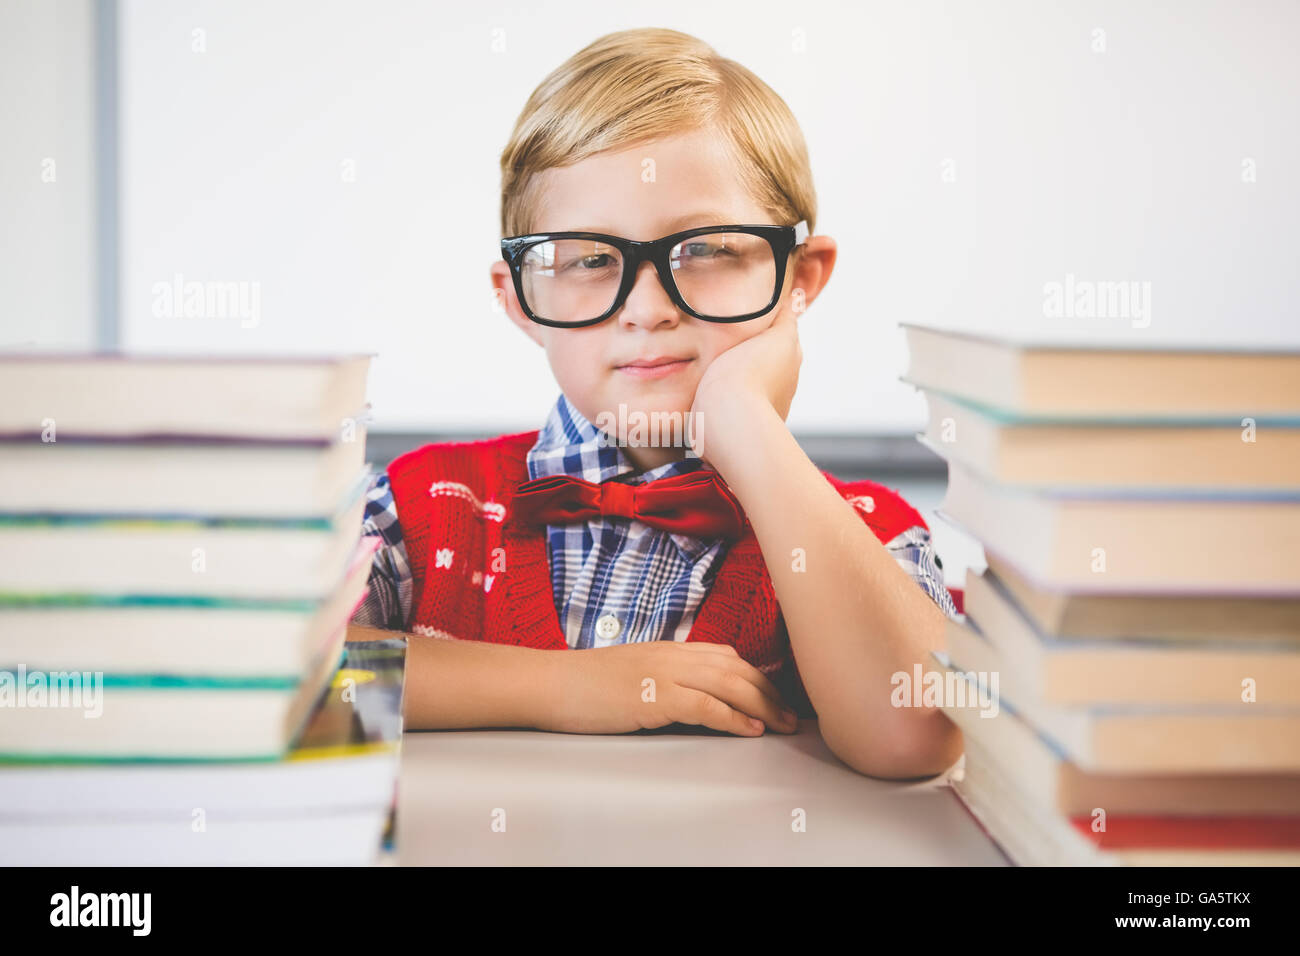 Portrait of schoolkid pretending to be a teacher in classroom Stock Photo